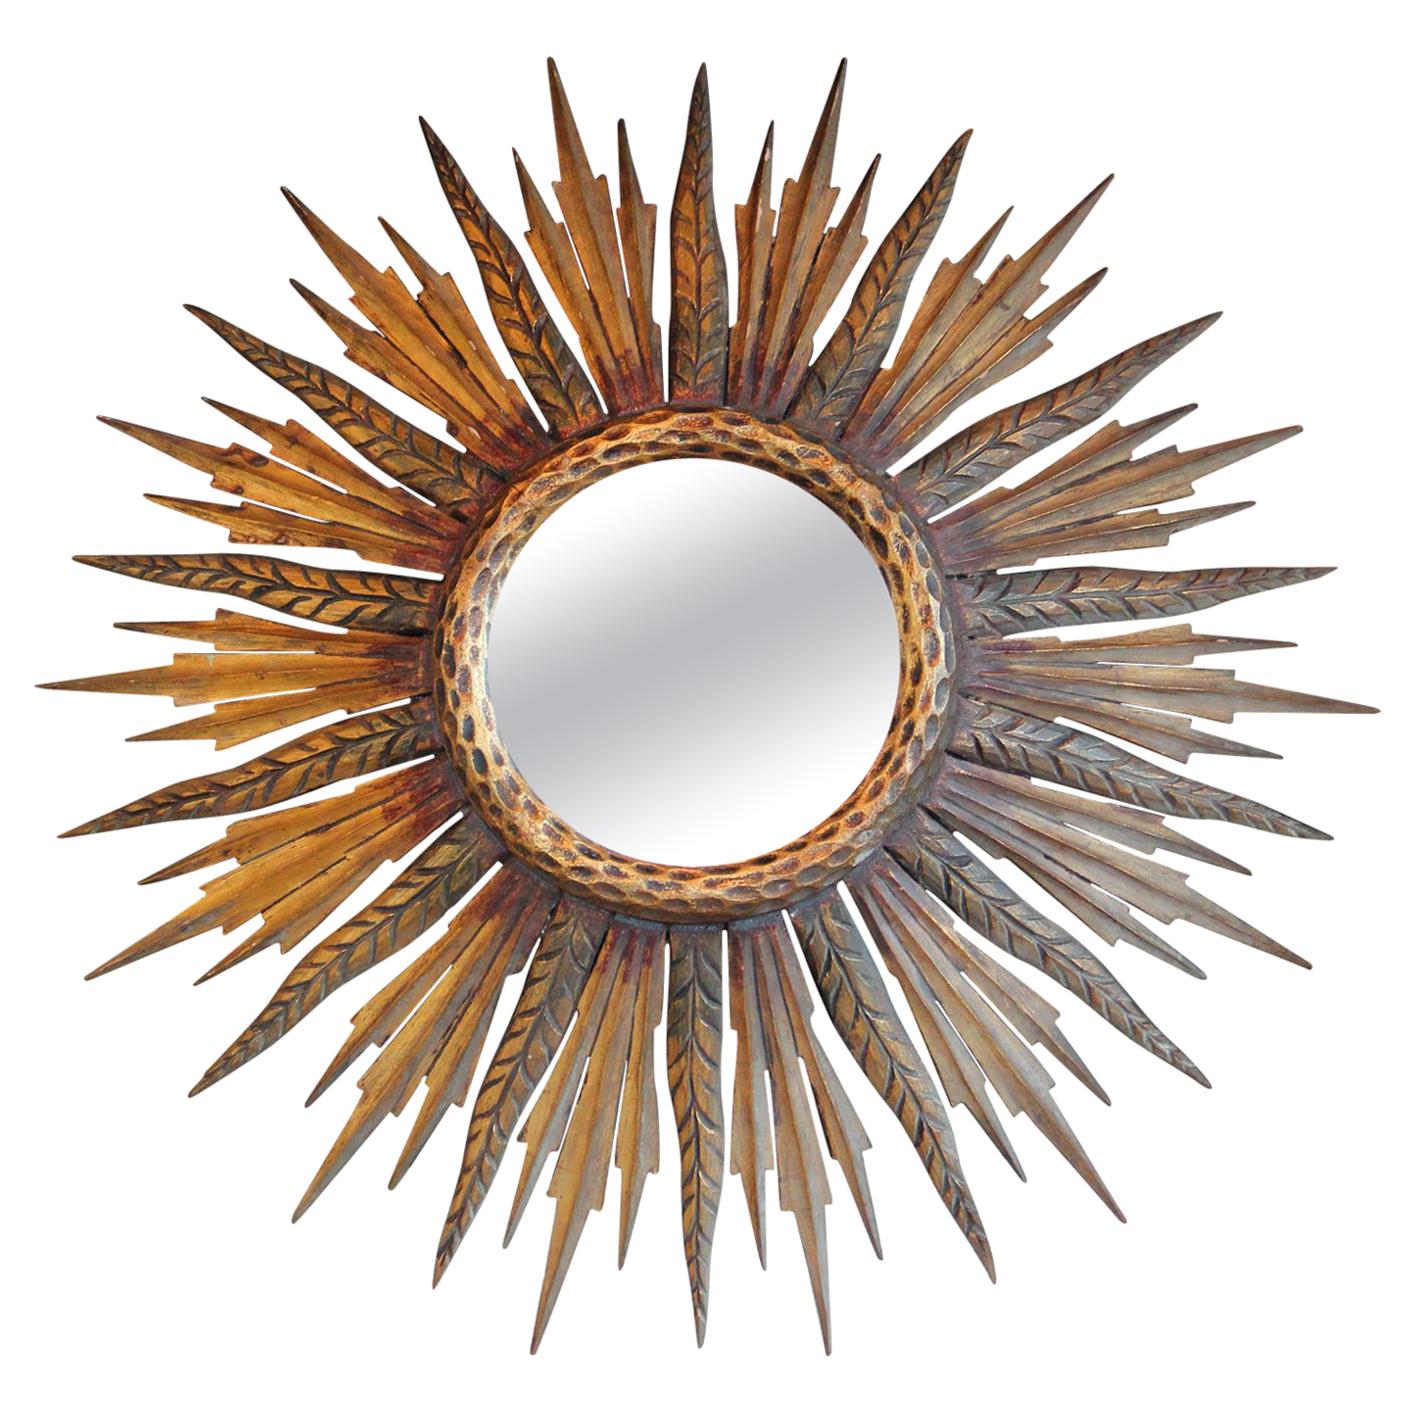 Midcentury French Sunburst Mirror with Feathered Rays and Original Mirror Glass